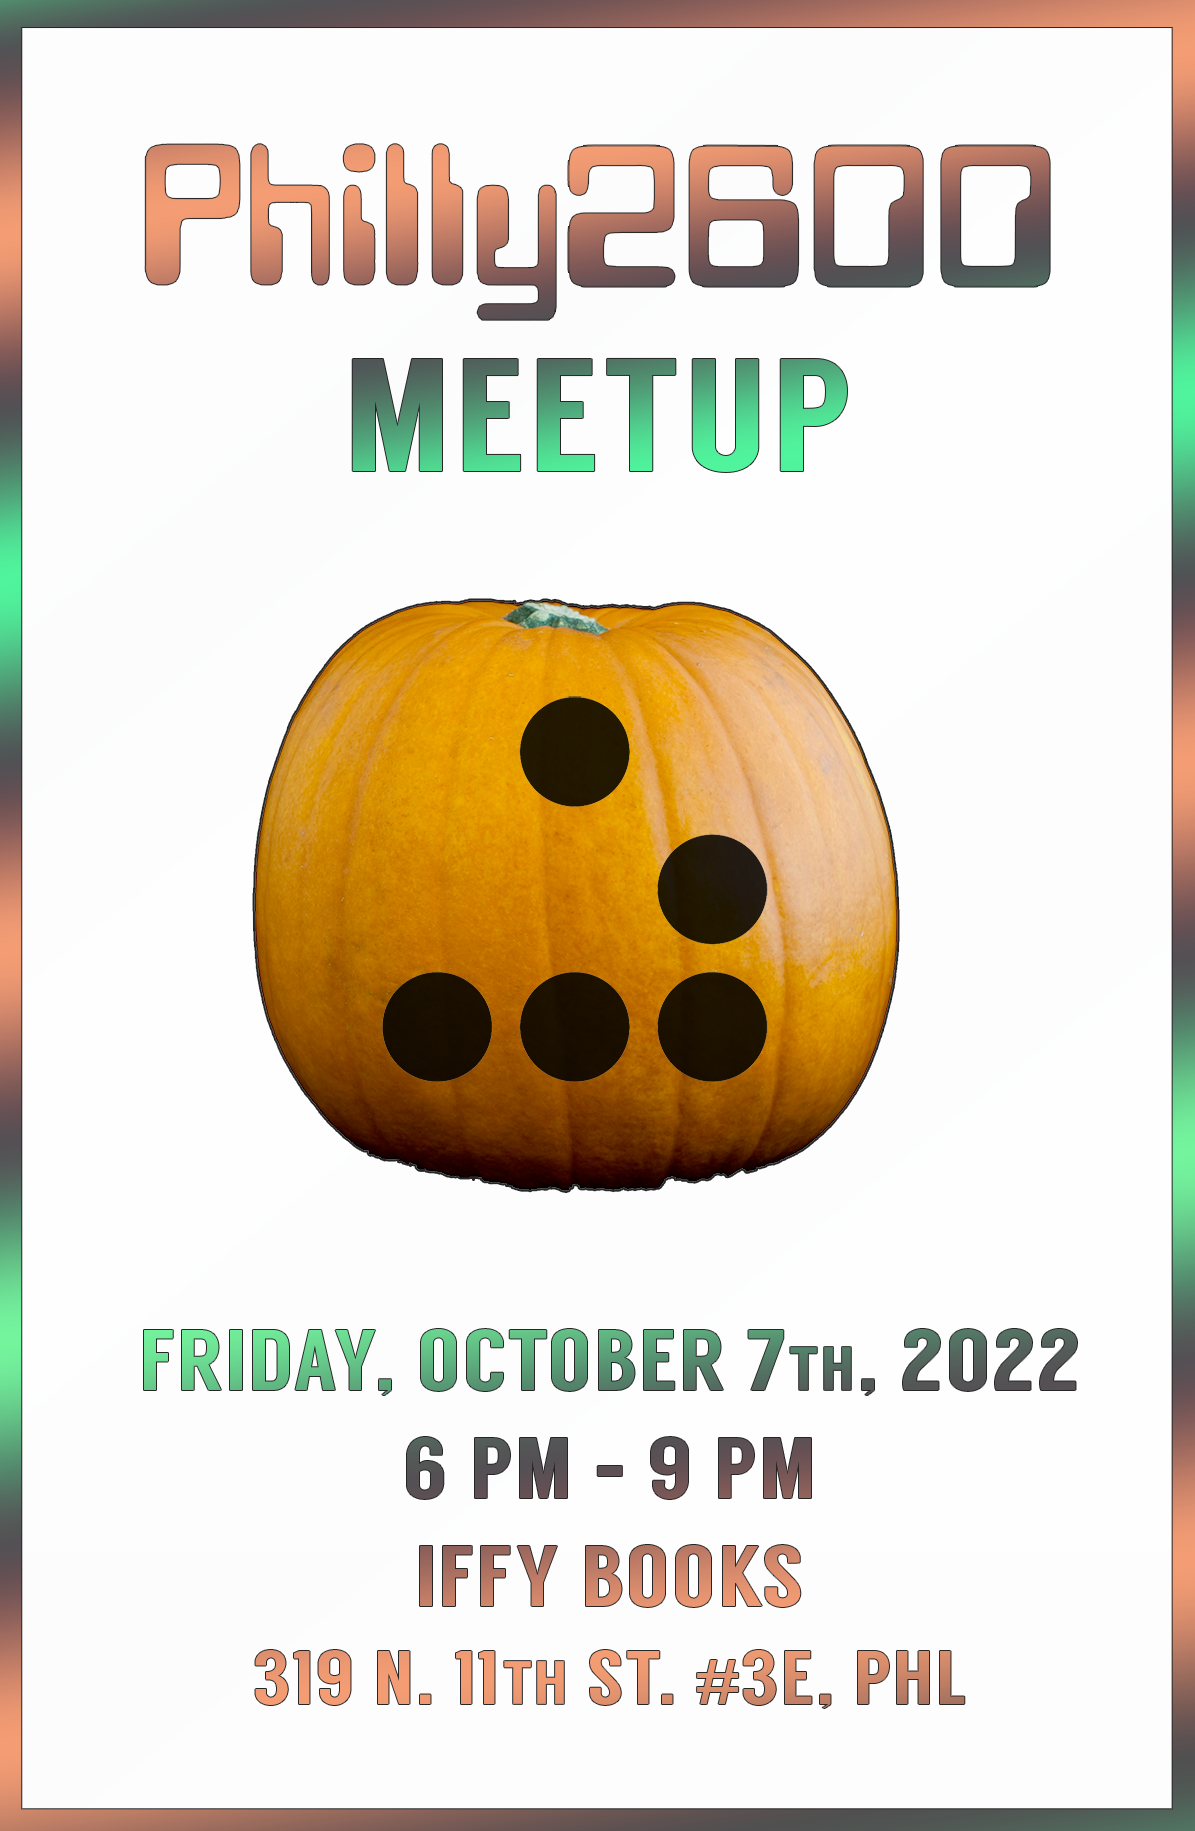 Flyer with a photo of a jack-o-lantern with 5 black dots forming a glider symbol from Conway's Game of Life. The text reads as follows: Philly 2600 Meetup / Friday, October 7th, 2022 / 6 PM – 9 PM / Iffy Books / 319 N. 11th St. #3E, PHL